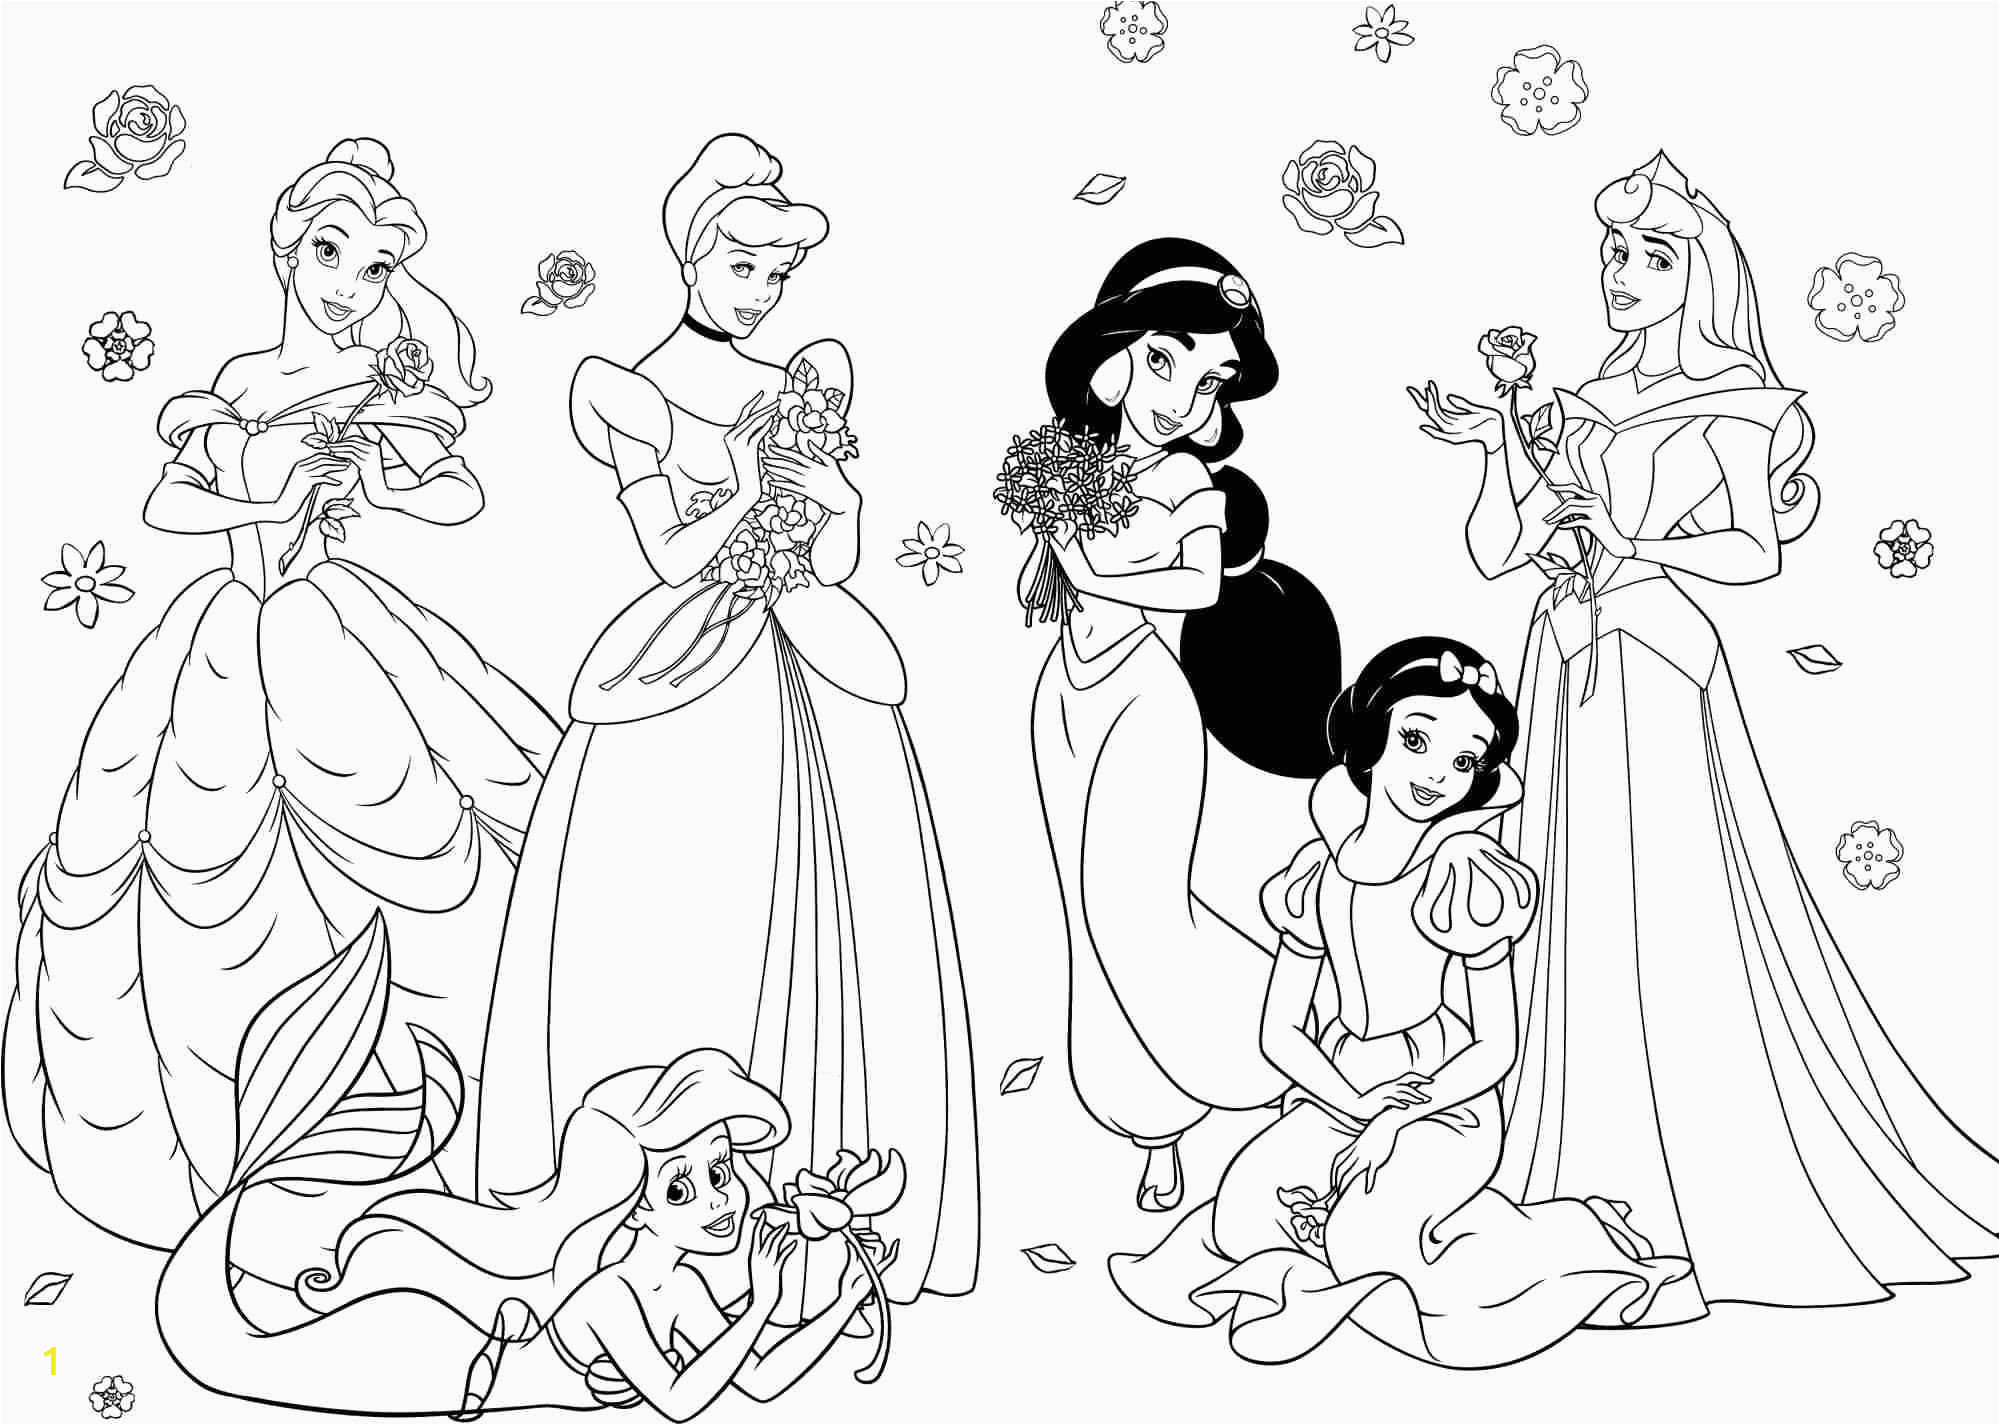 Free Coloring Pages Disney Princesses Tree Girl Coloring In 2020 with Images